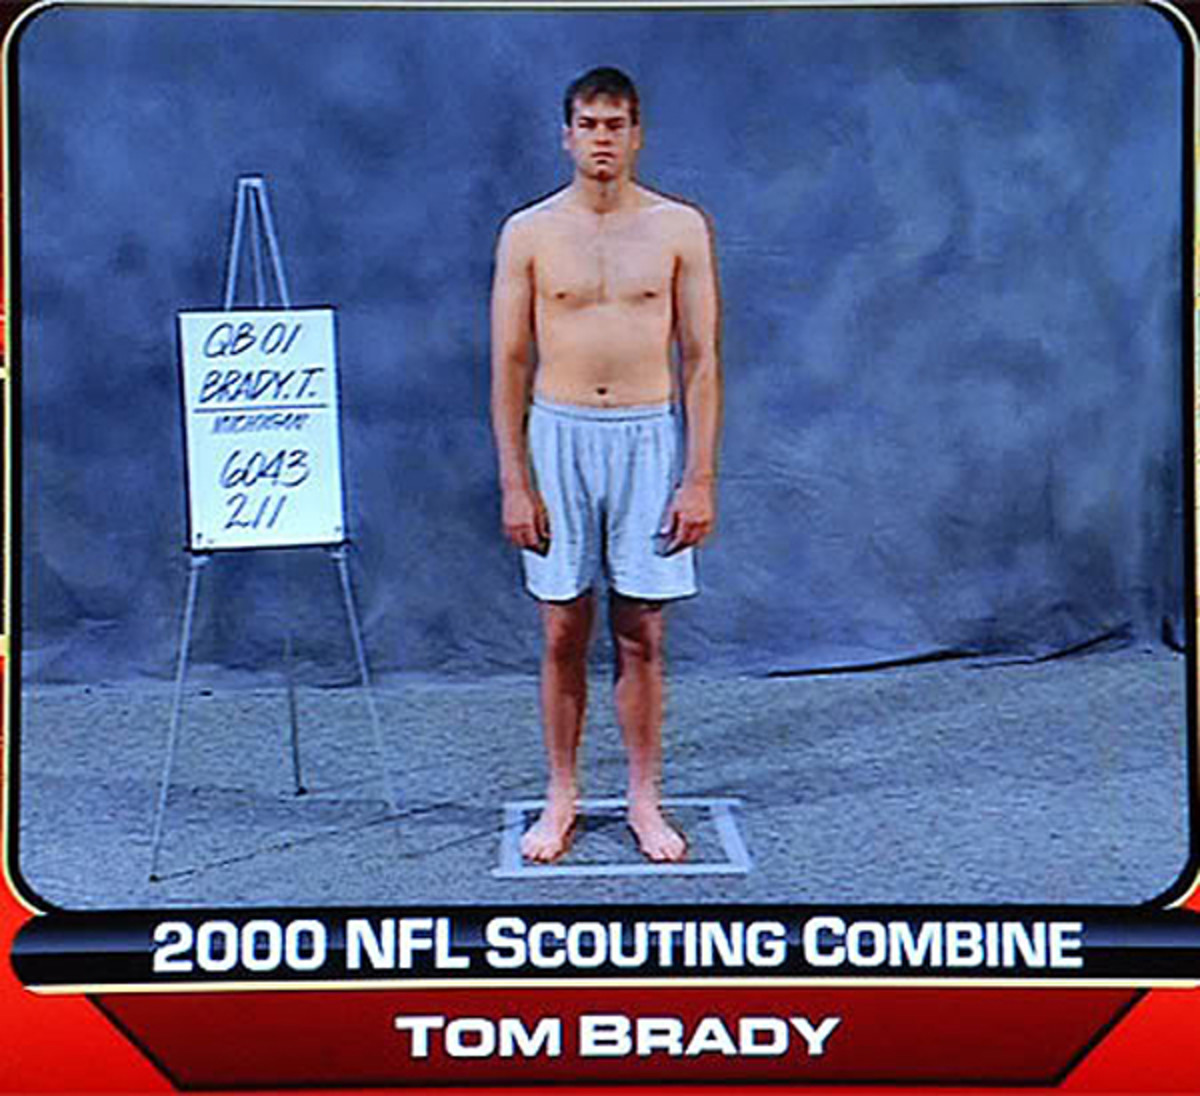 Here's A Pic Of Tom Brady Shirtless At The 2000 NFL Combine - Sports  Illustrated